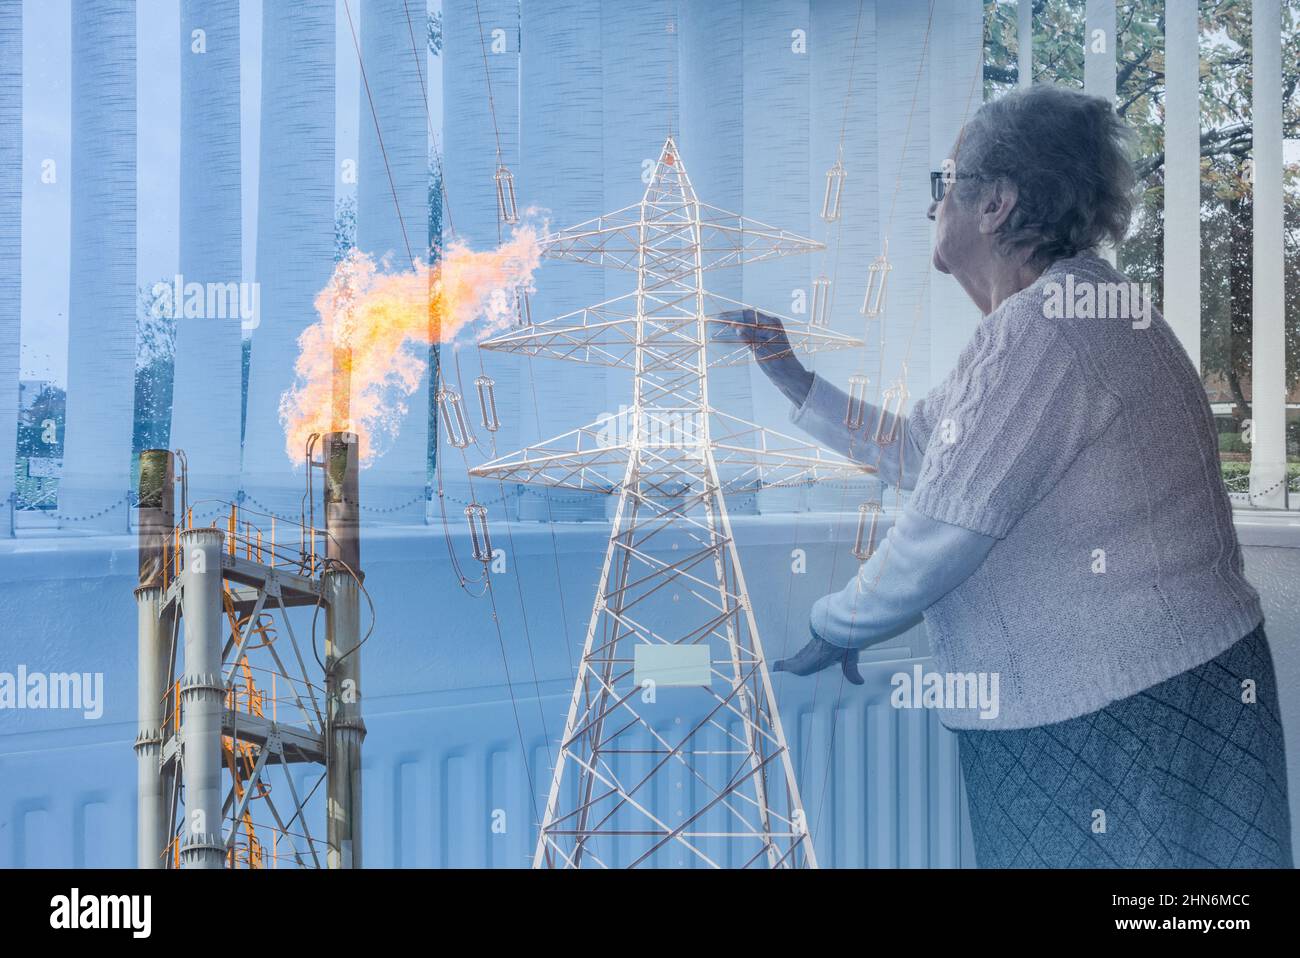 90 year old woman looking out of window with hand on radiator. Electricity pylon and industrial gas flare chimney image blended. energy crisis concept. Stock Photo